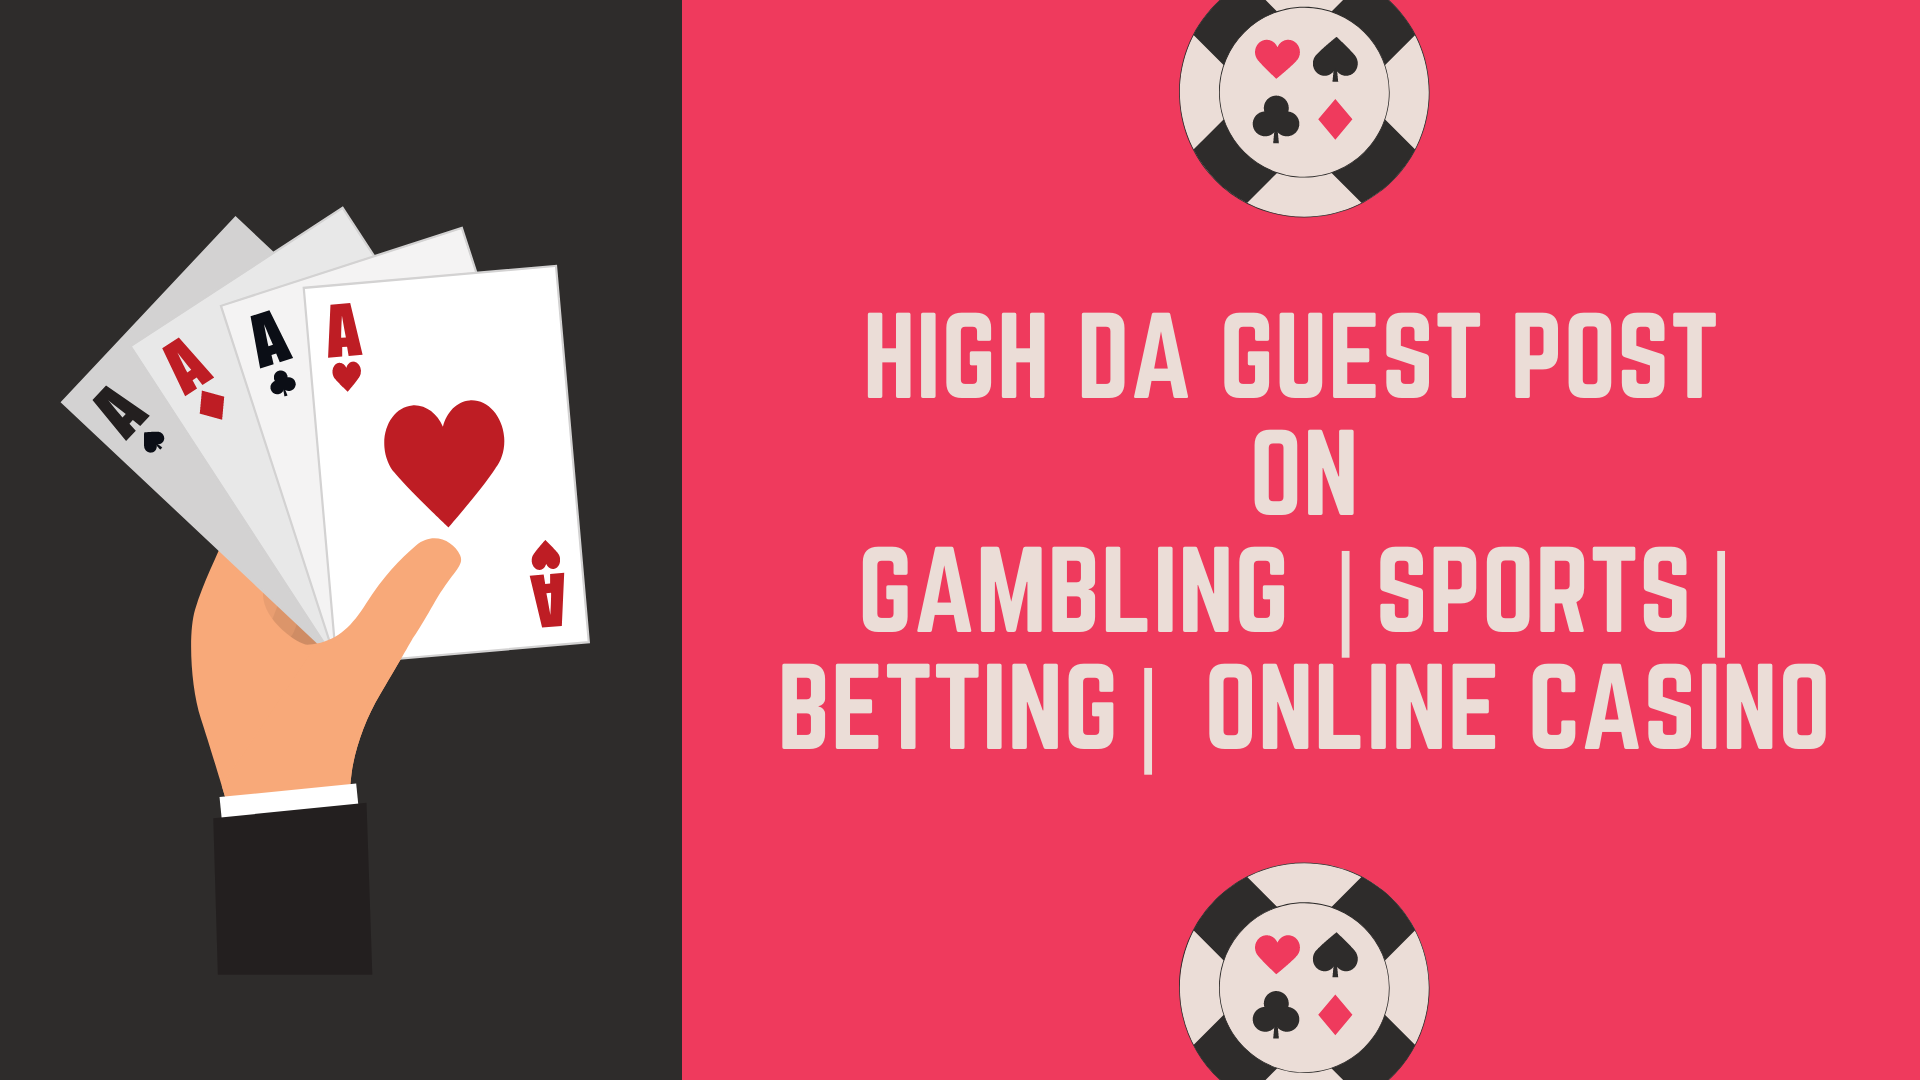 35 Niche Guest Post on Gambling, Online Casino, Sports & Betting sites